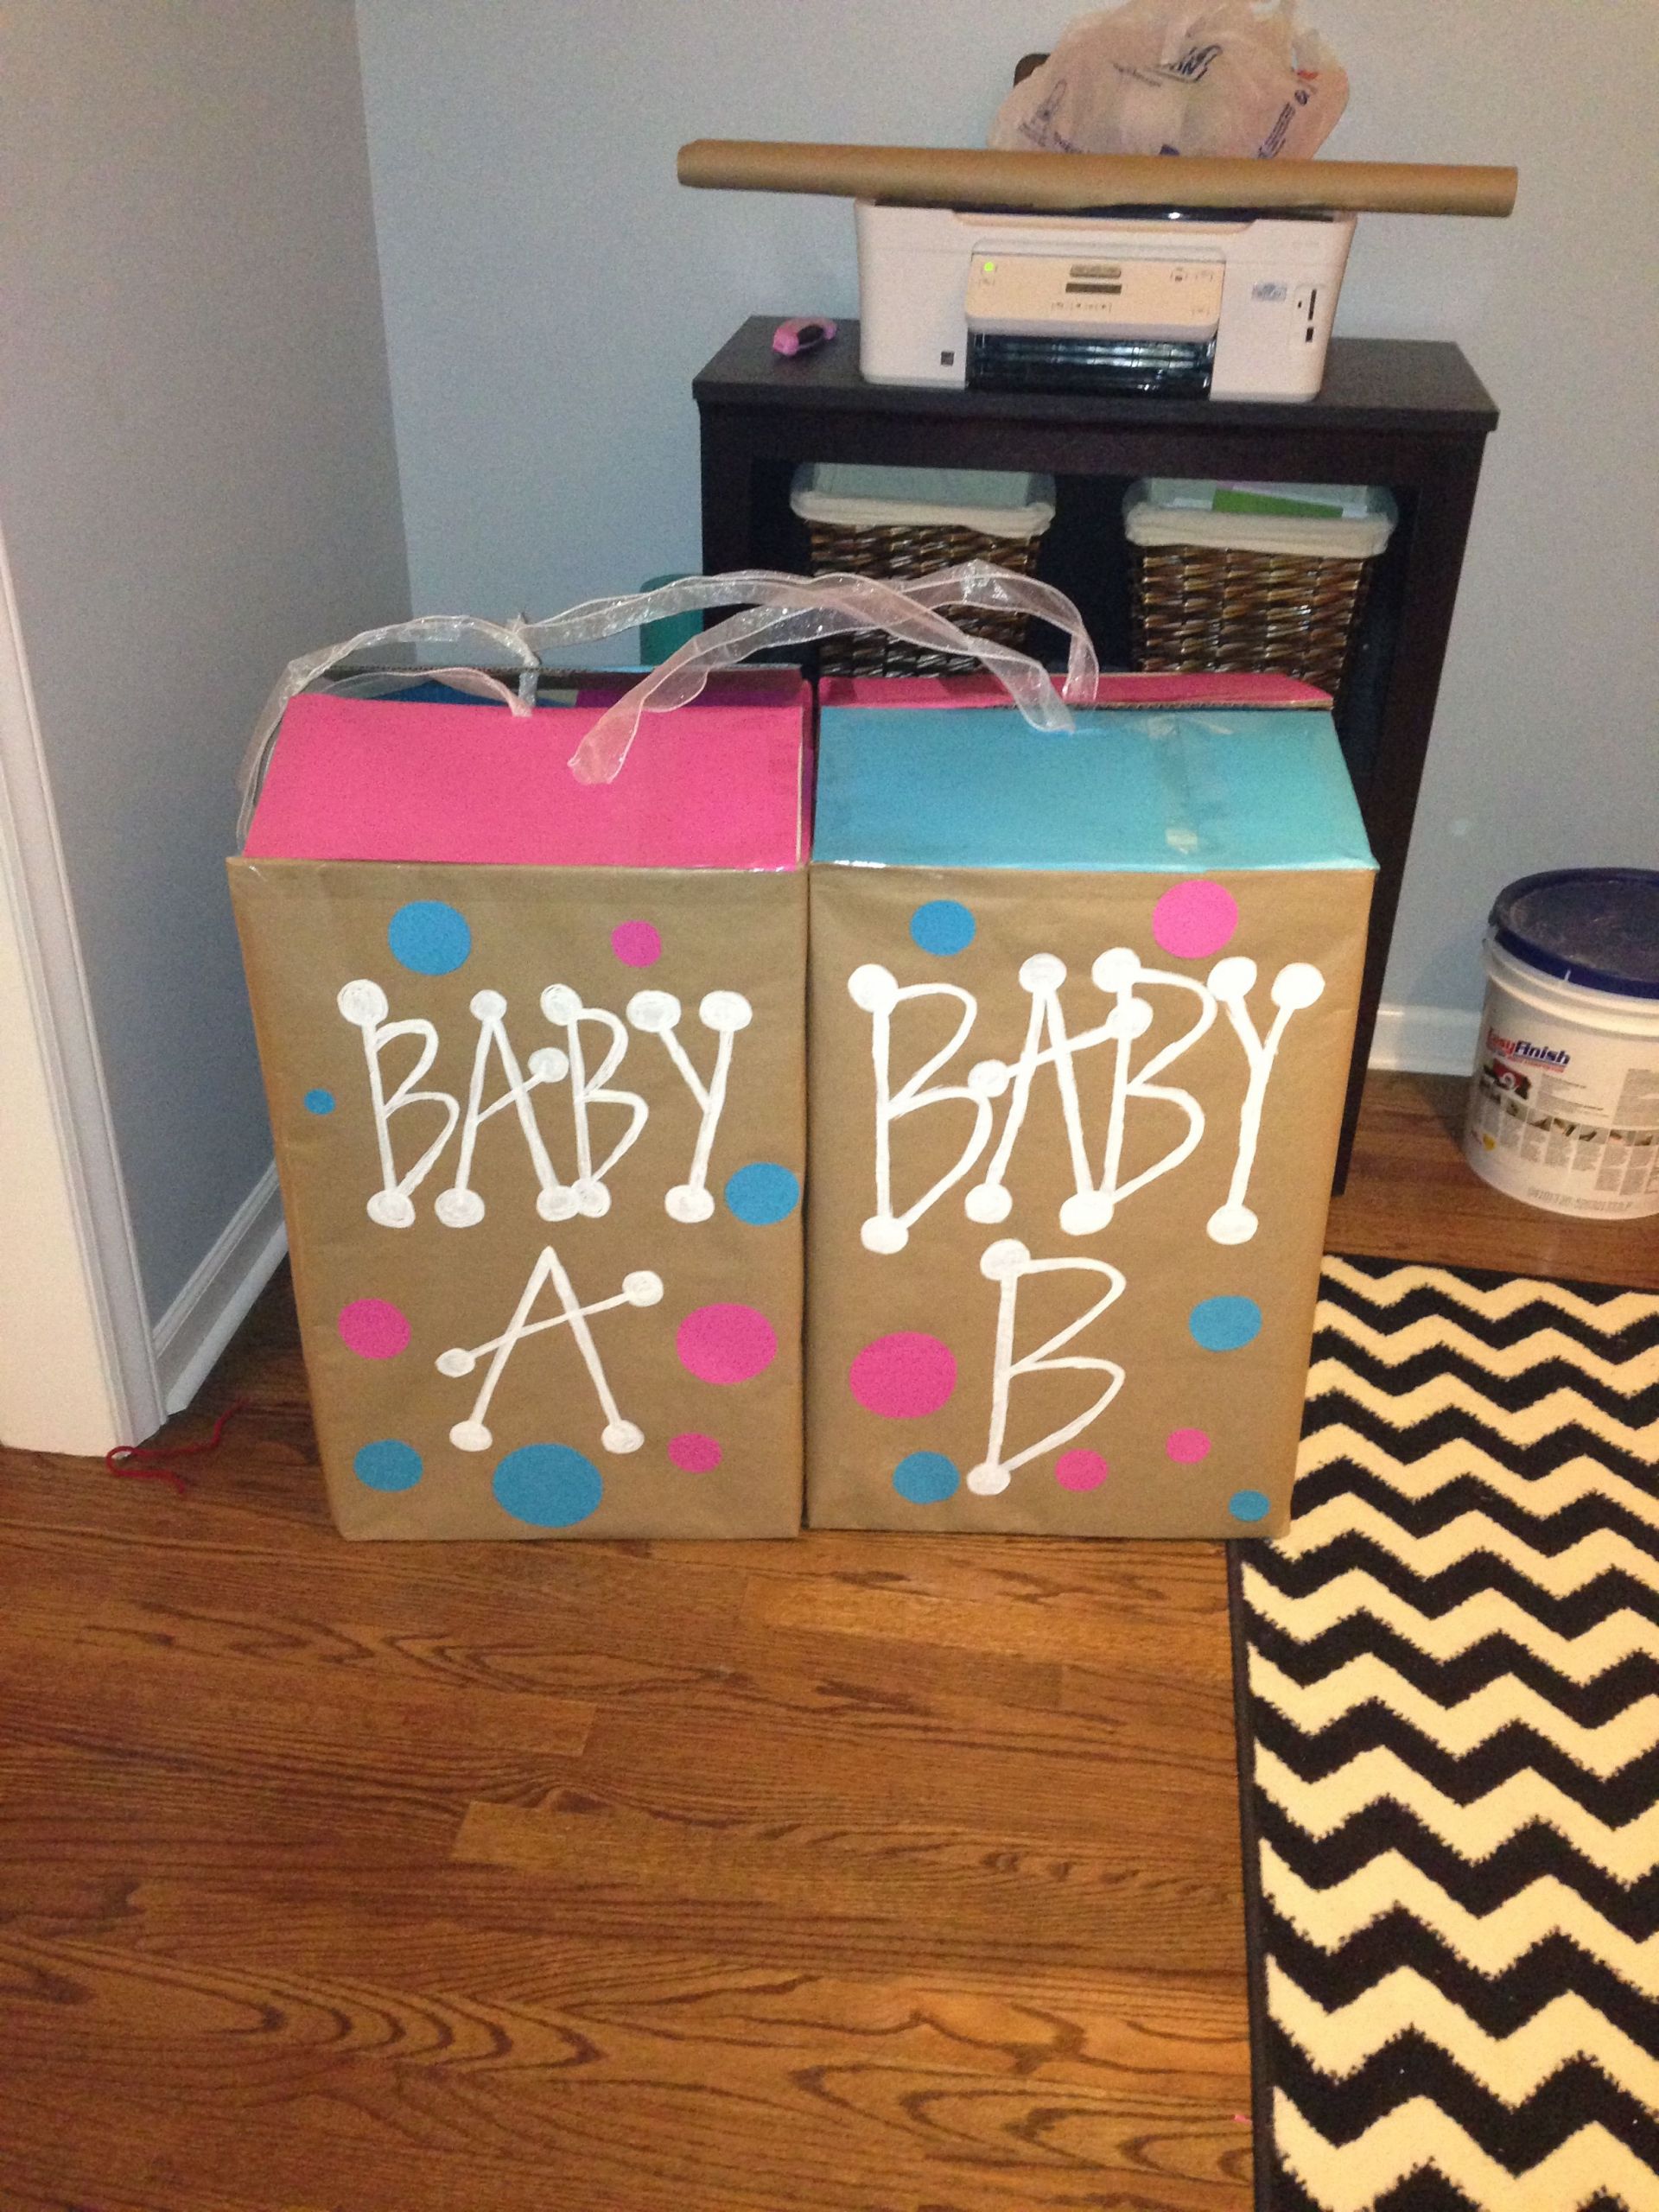 Twins Gender Reveal Party Ideas
 Baby a and baby b gender reveal boxes For twins